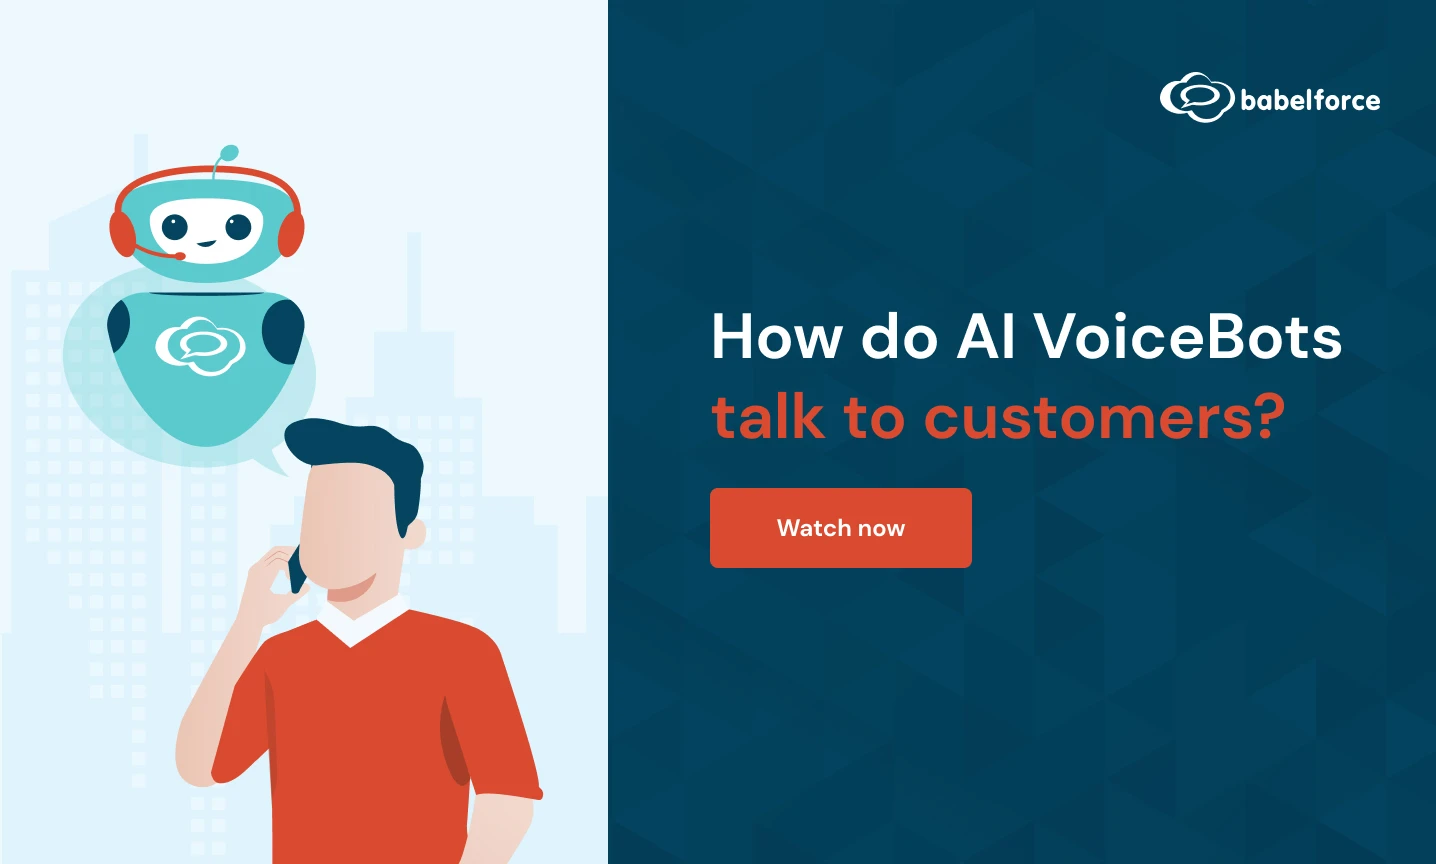 How do AI VoiceBots talk to customers?